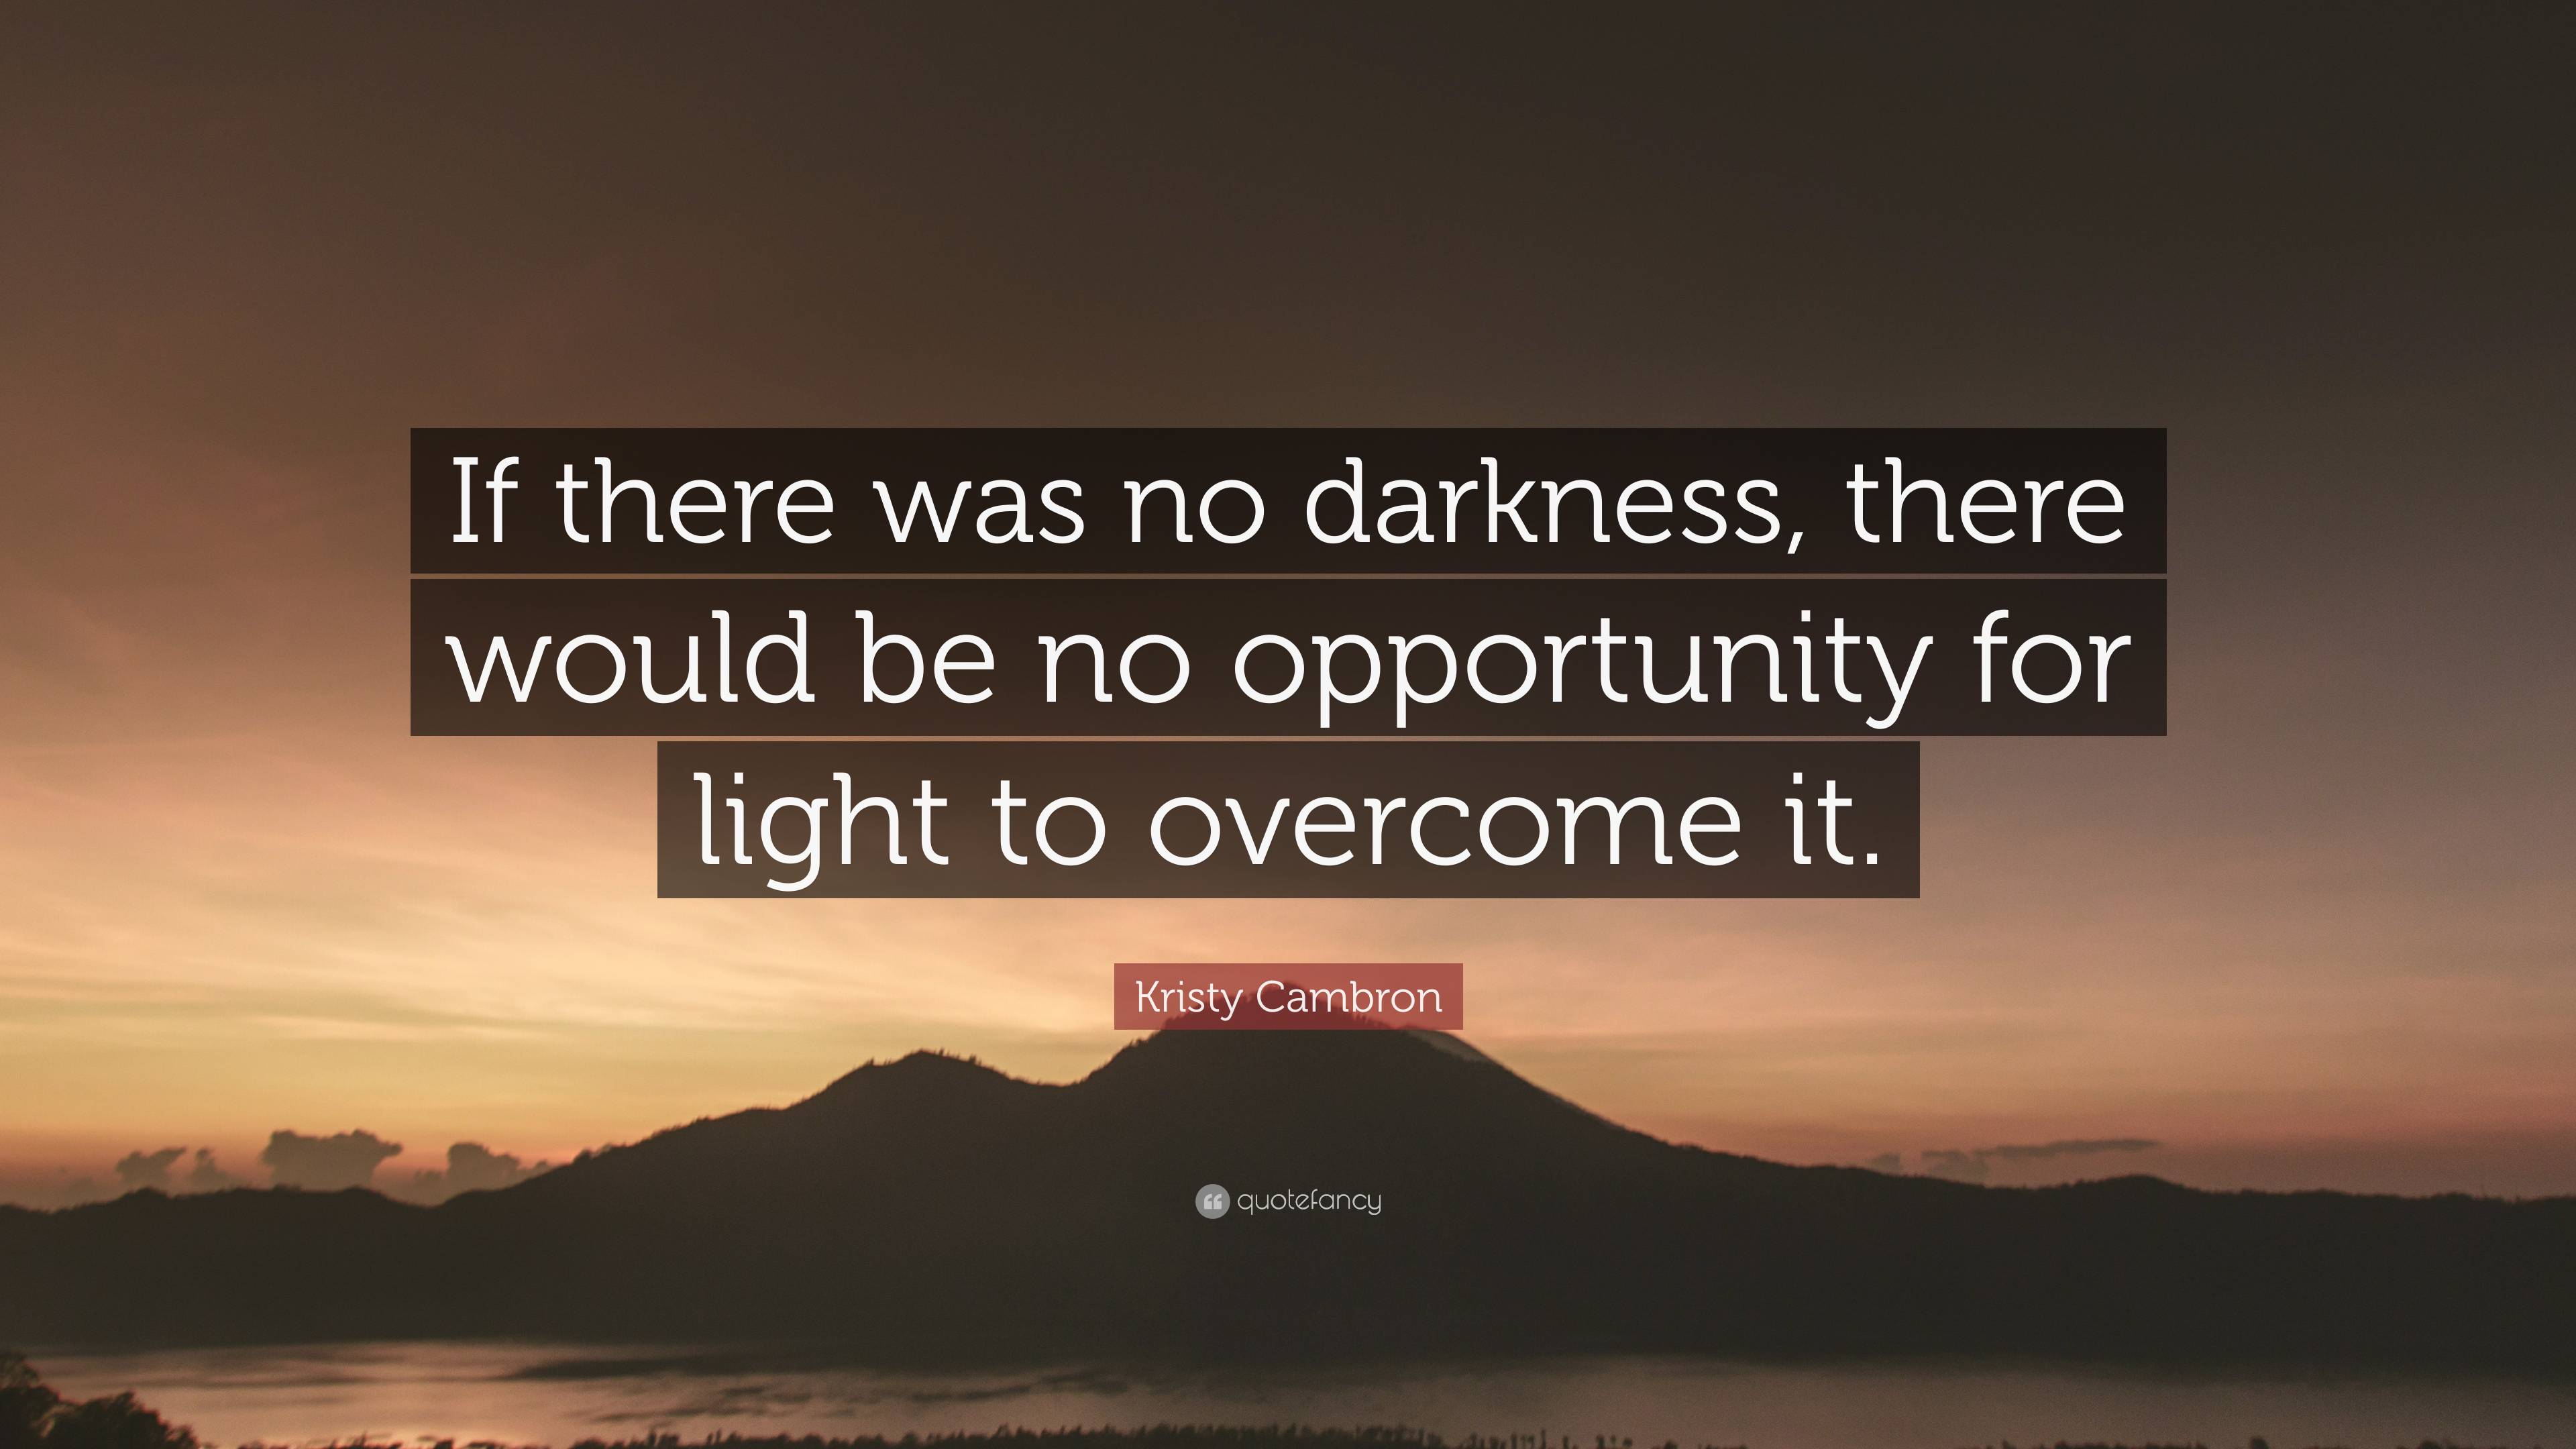 Kristy Cambron Quote: “If there was no darkness, there would be no ...